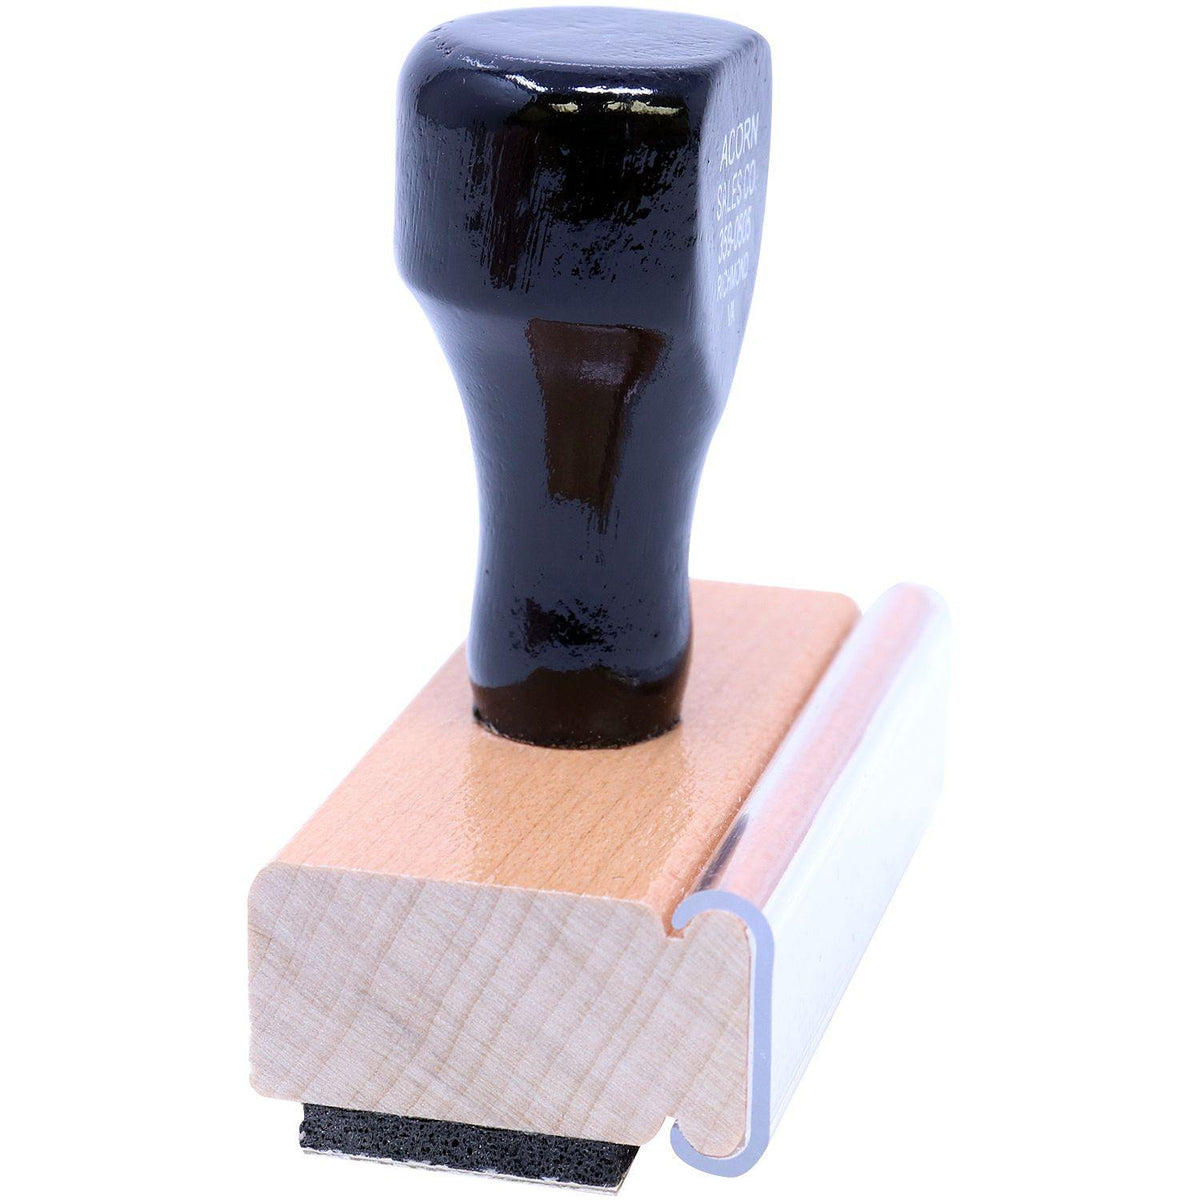 Side View of Large Pkg Rubber Stamp at an Angle